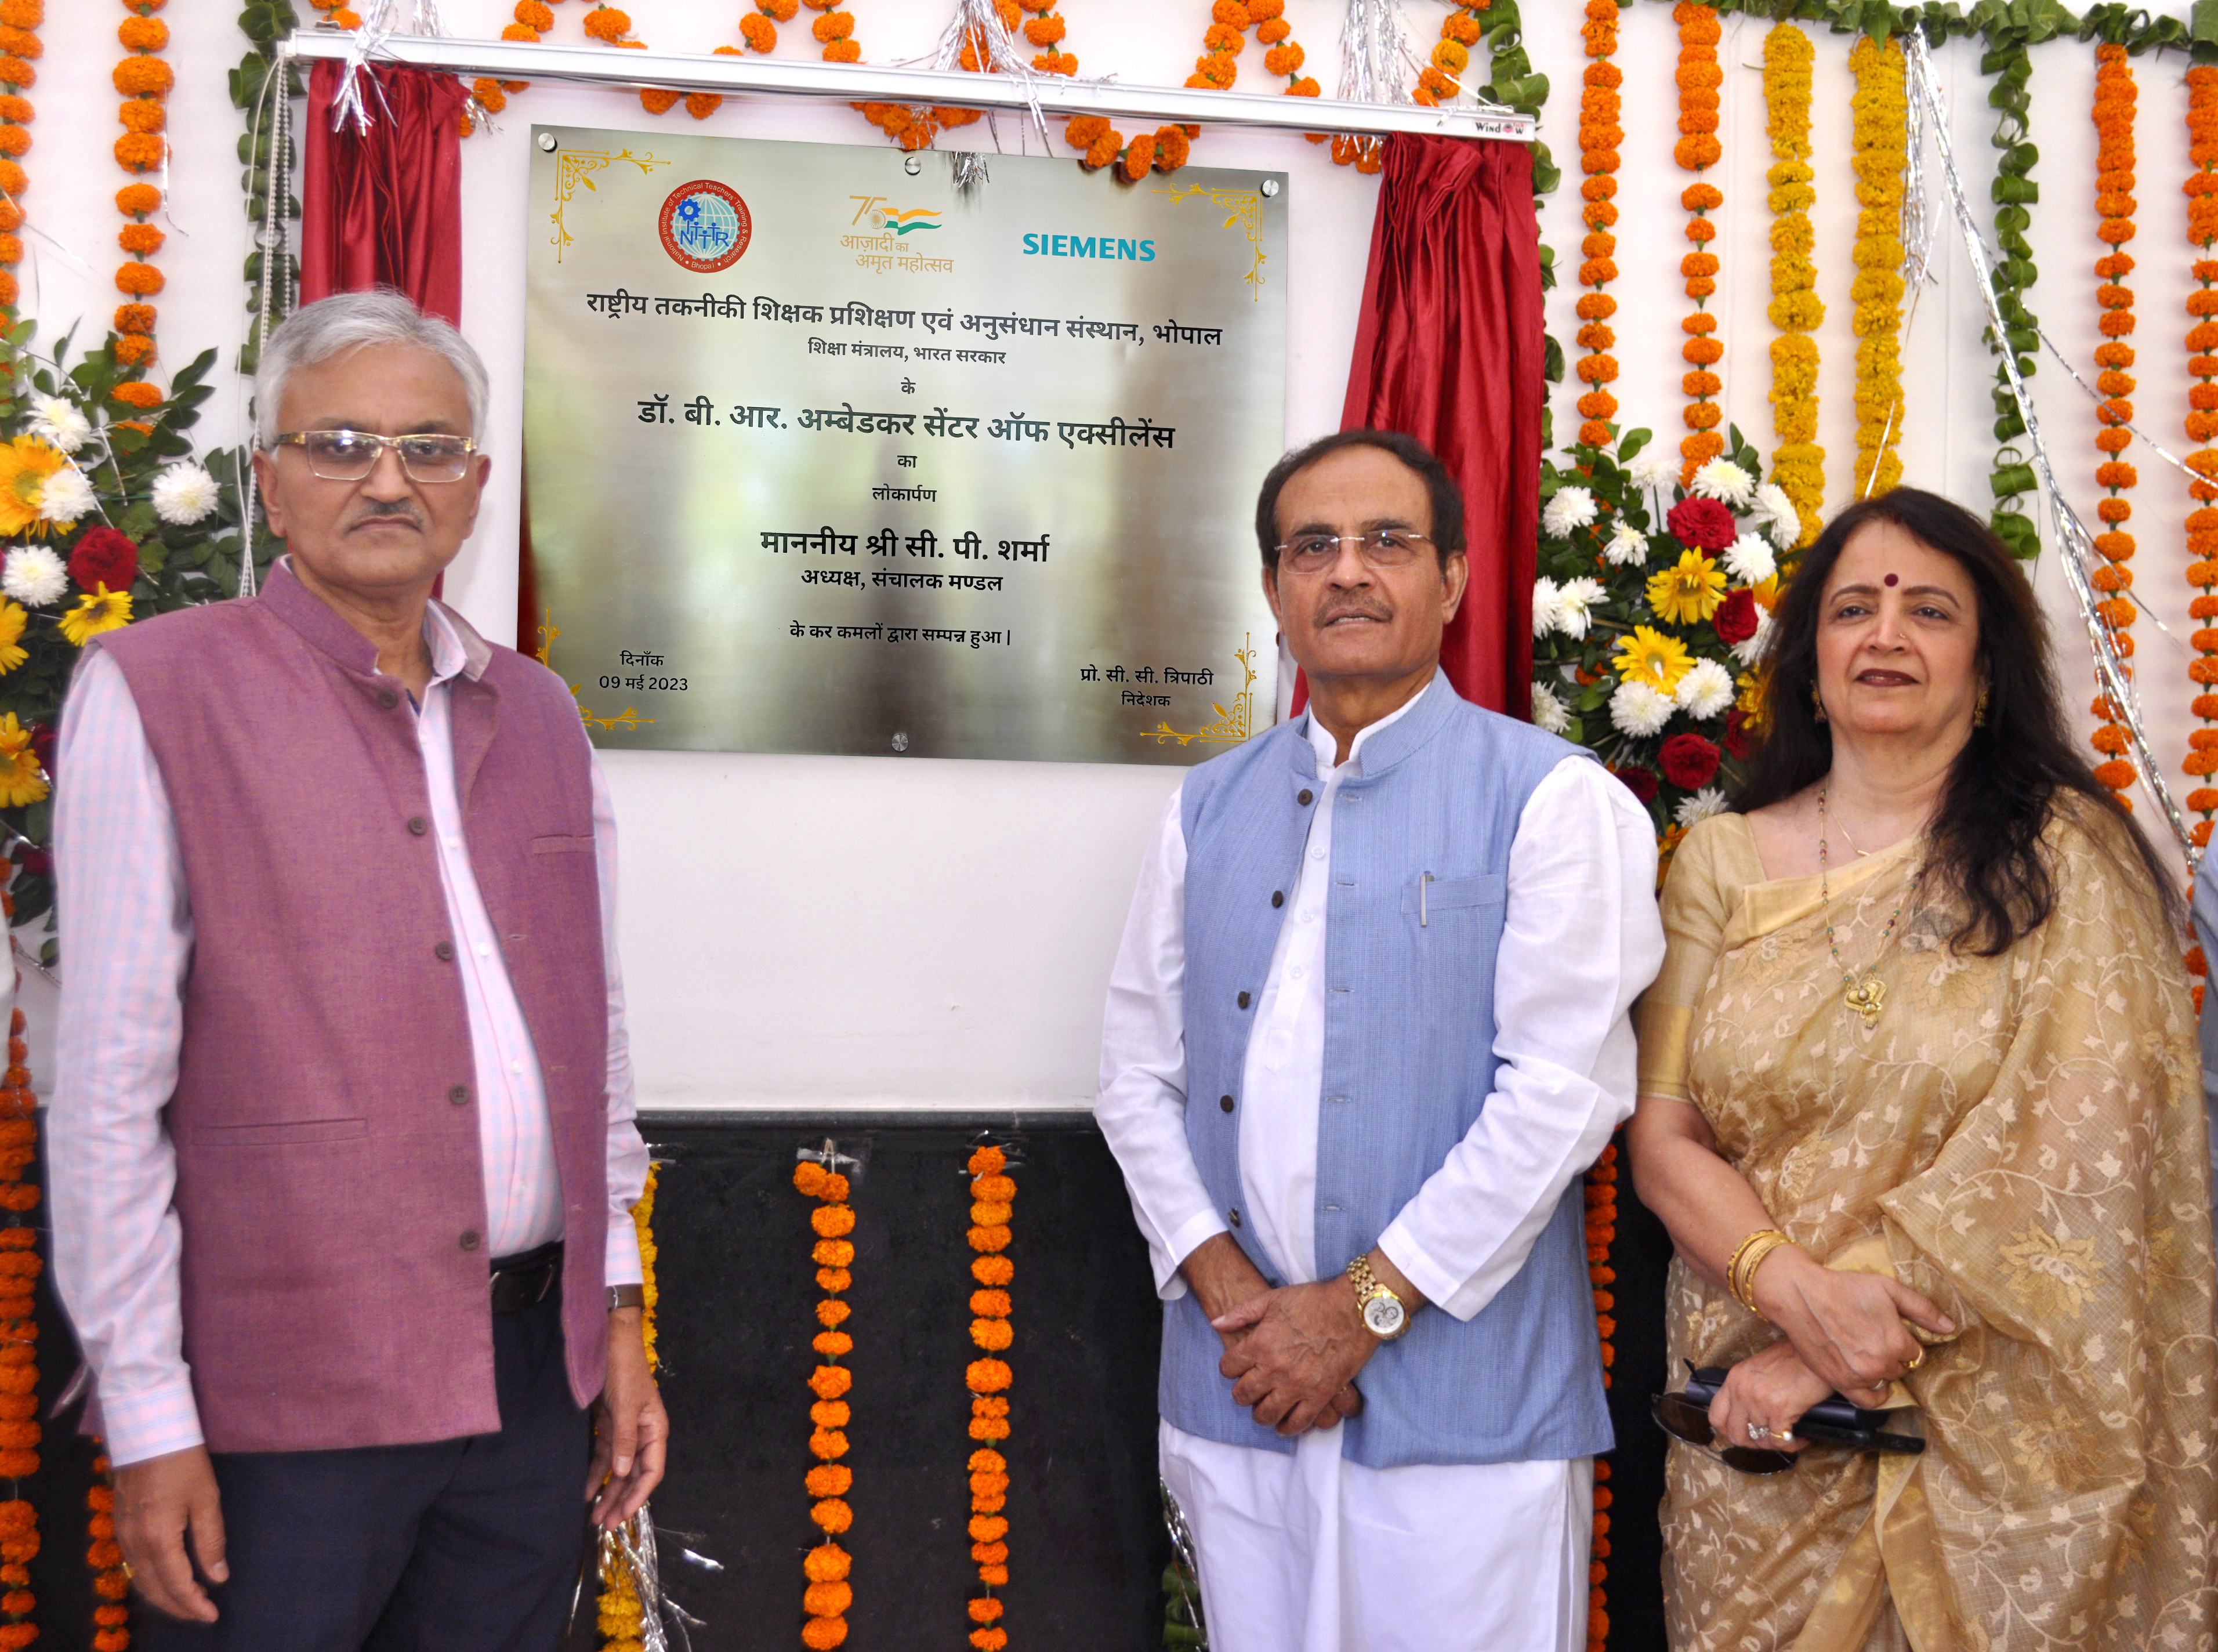 Dr Ambedkar Center of Excellence at NITTTR Bhopal formally inaugurated.